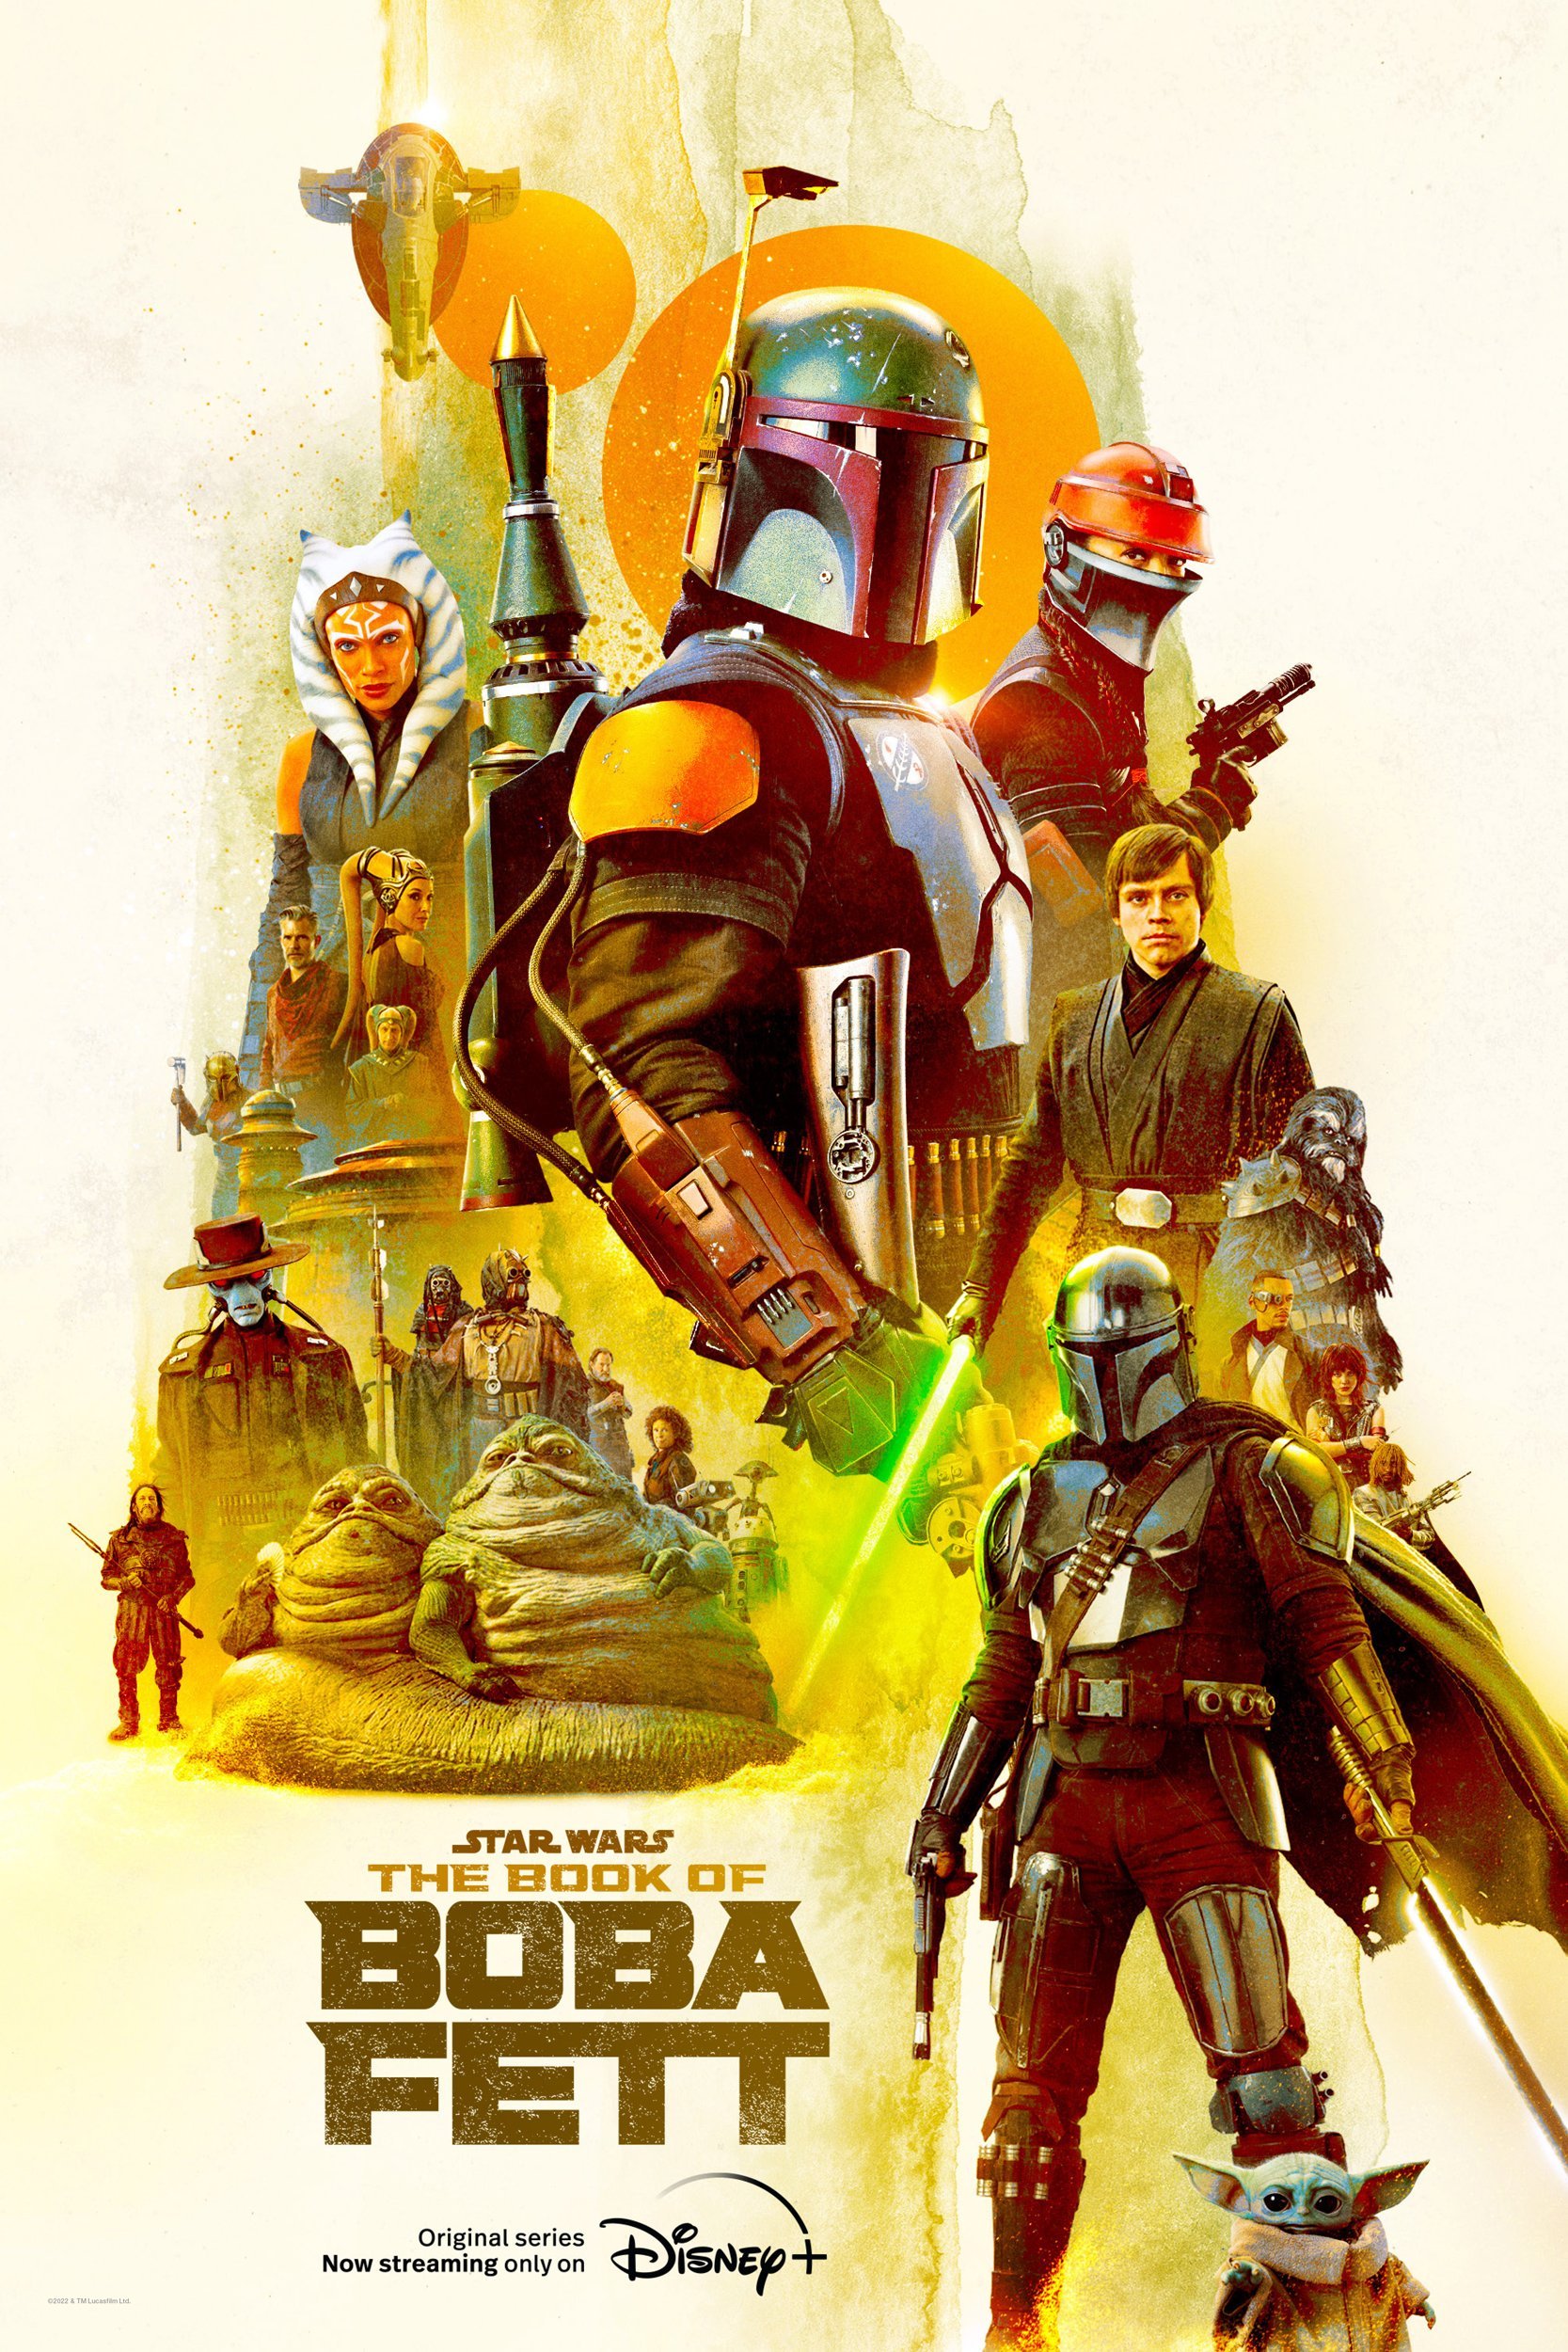 New \'The Book News Fett\' Season\'s Poster of - Star Wars Character-Filled Ahead Boba Arrives Net of Finale